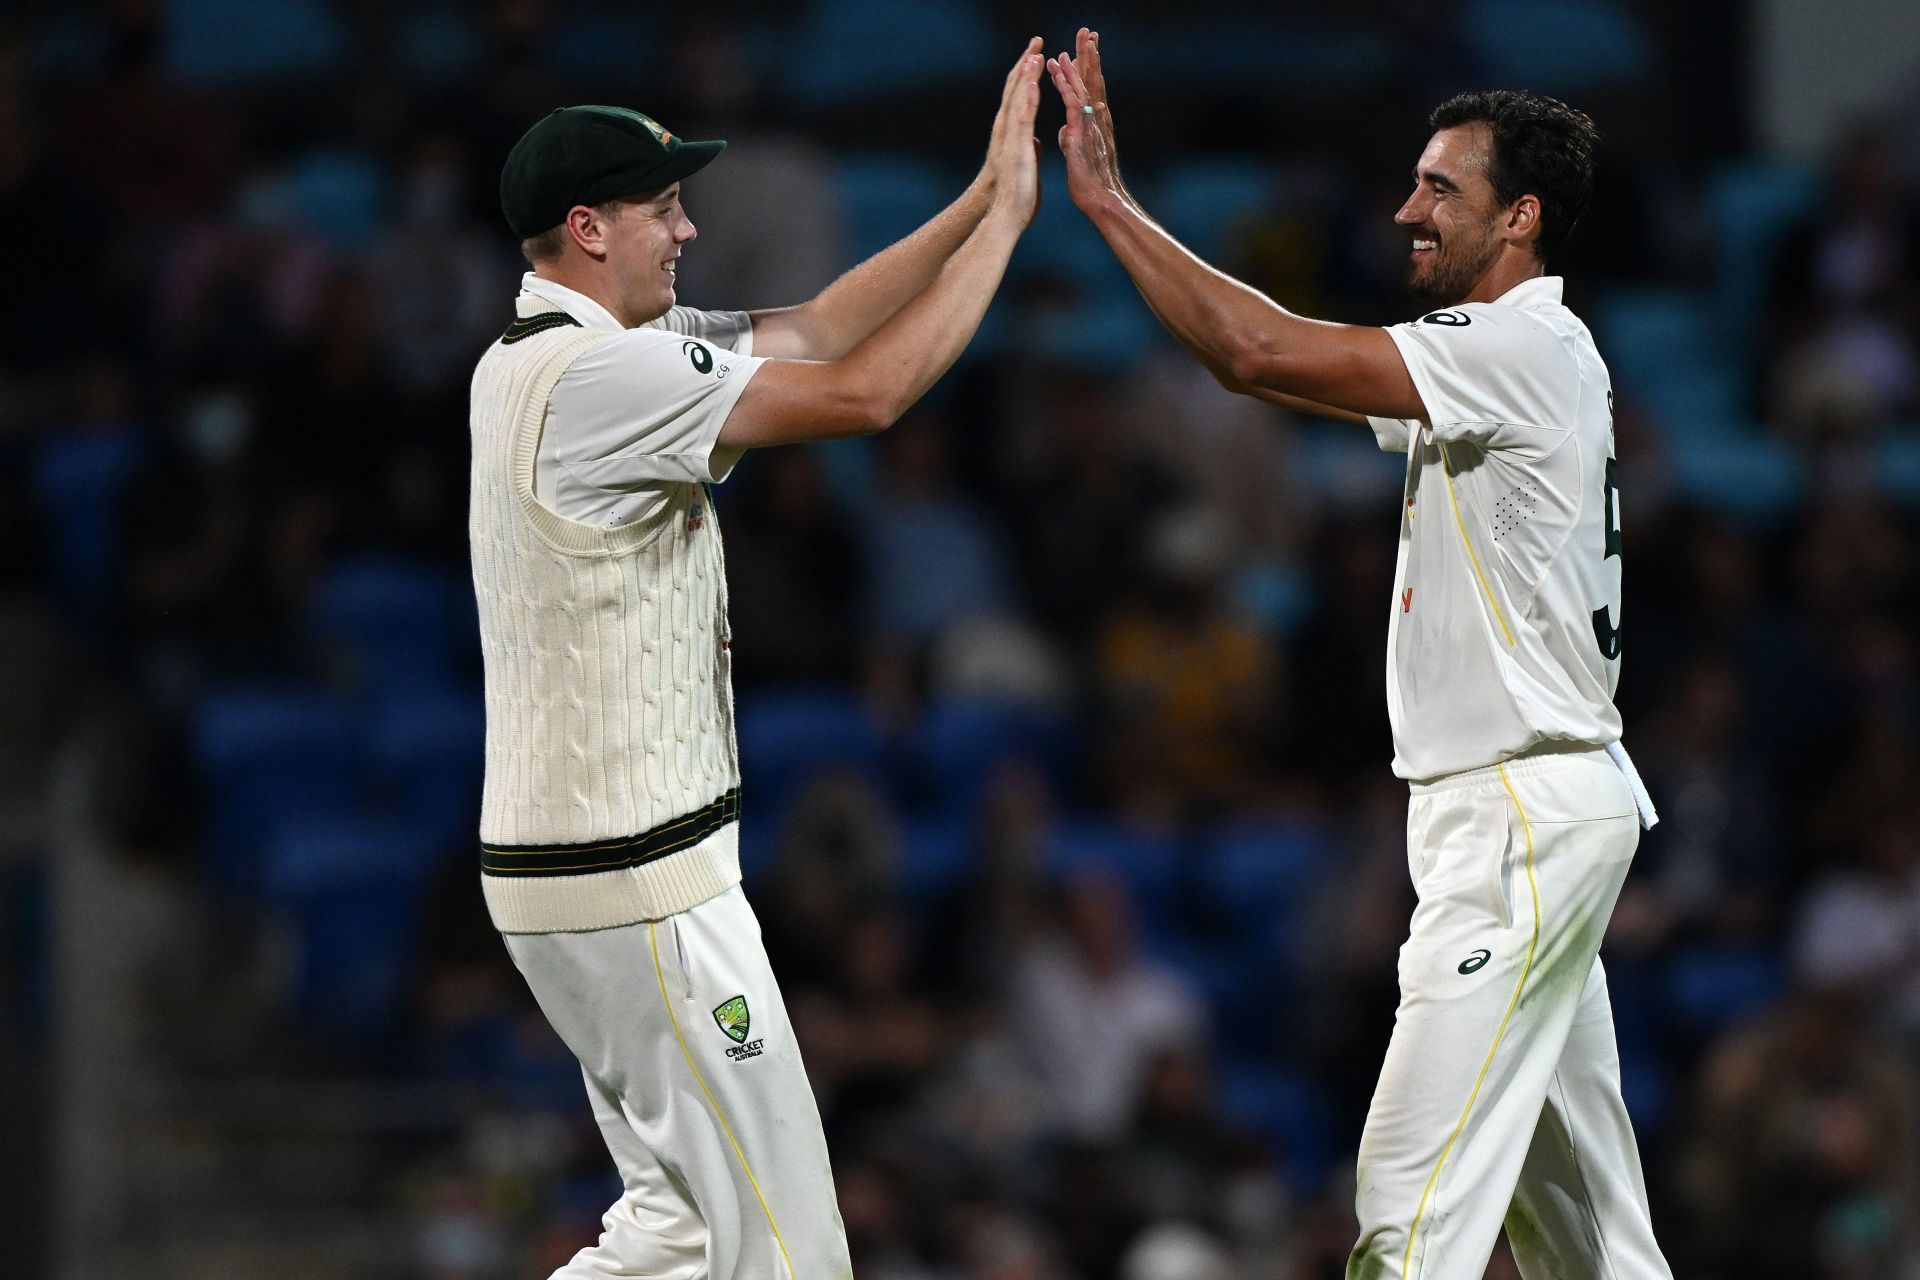 Mitchell Starc (R) was the pick of the bowlers in the first innings